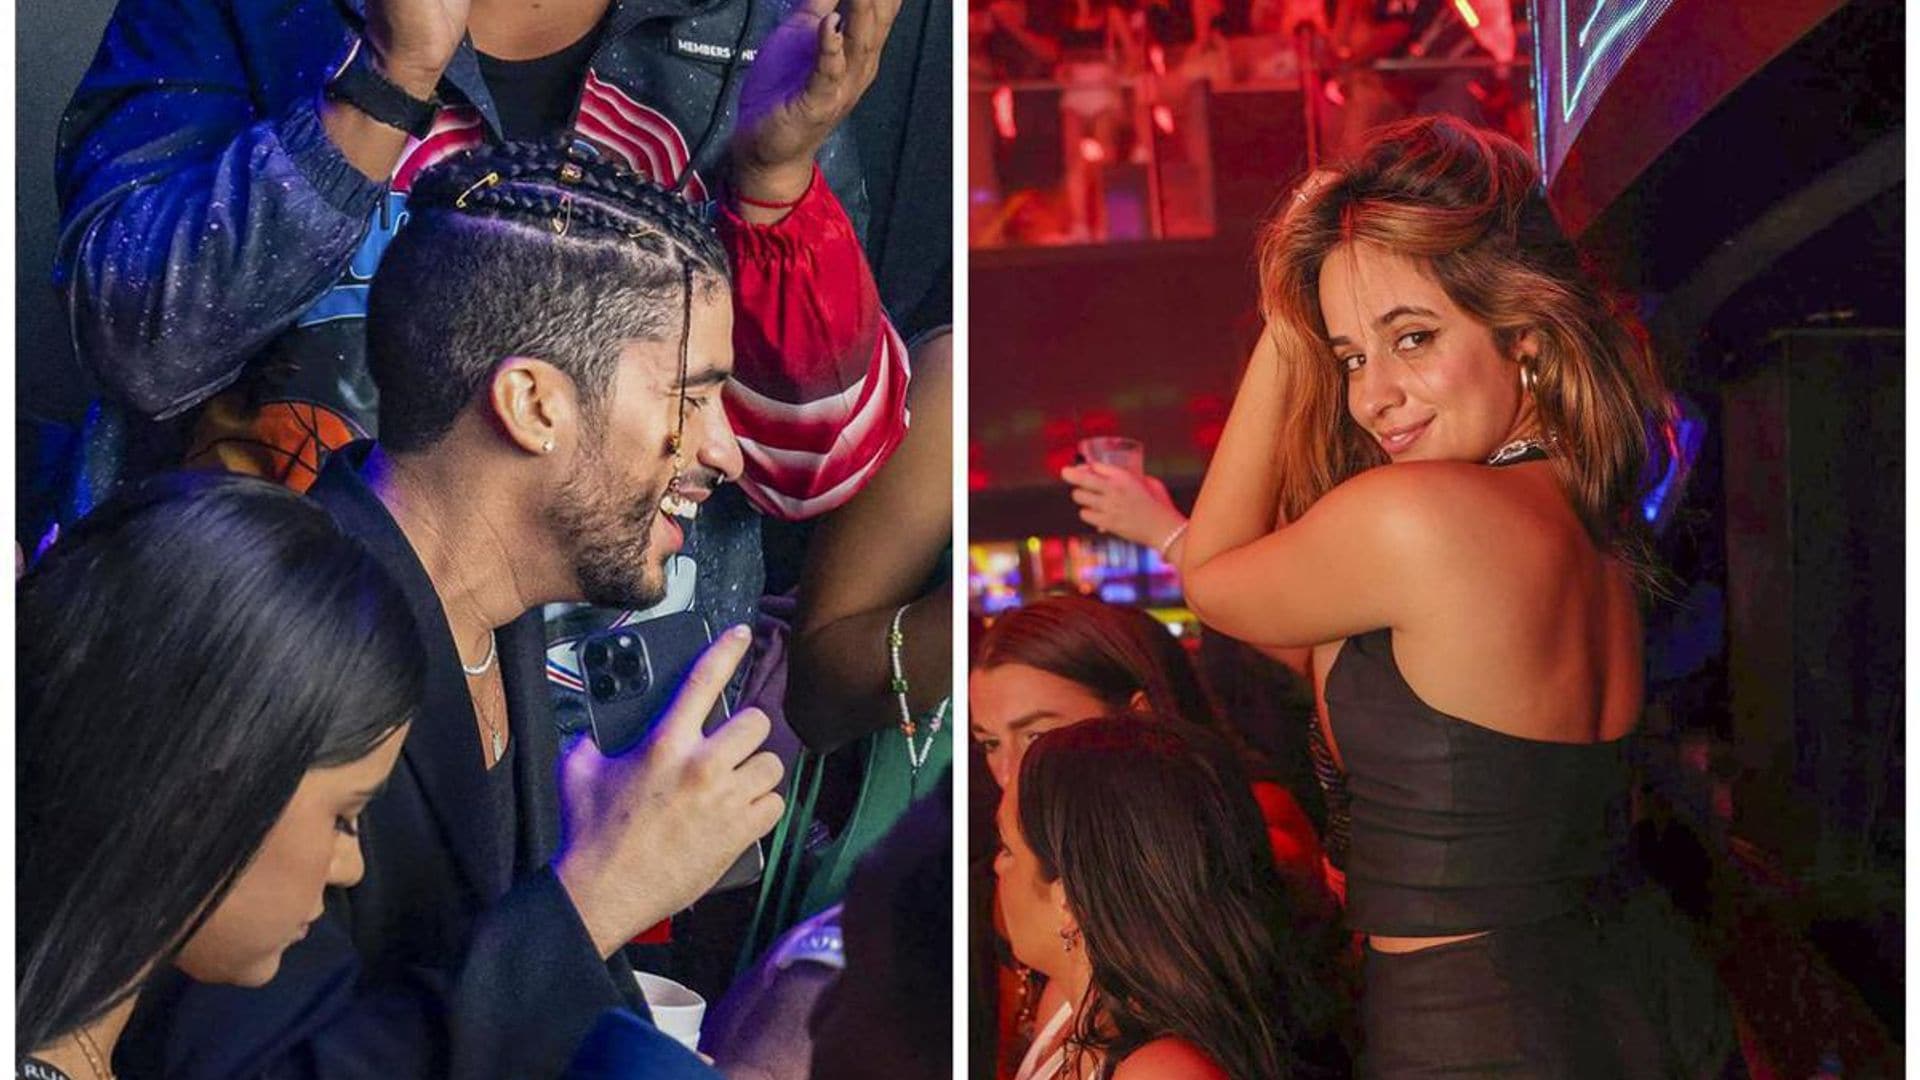 Bad Bunny and Camila Cabello have a blast at a party in Miami